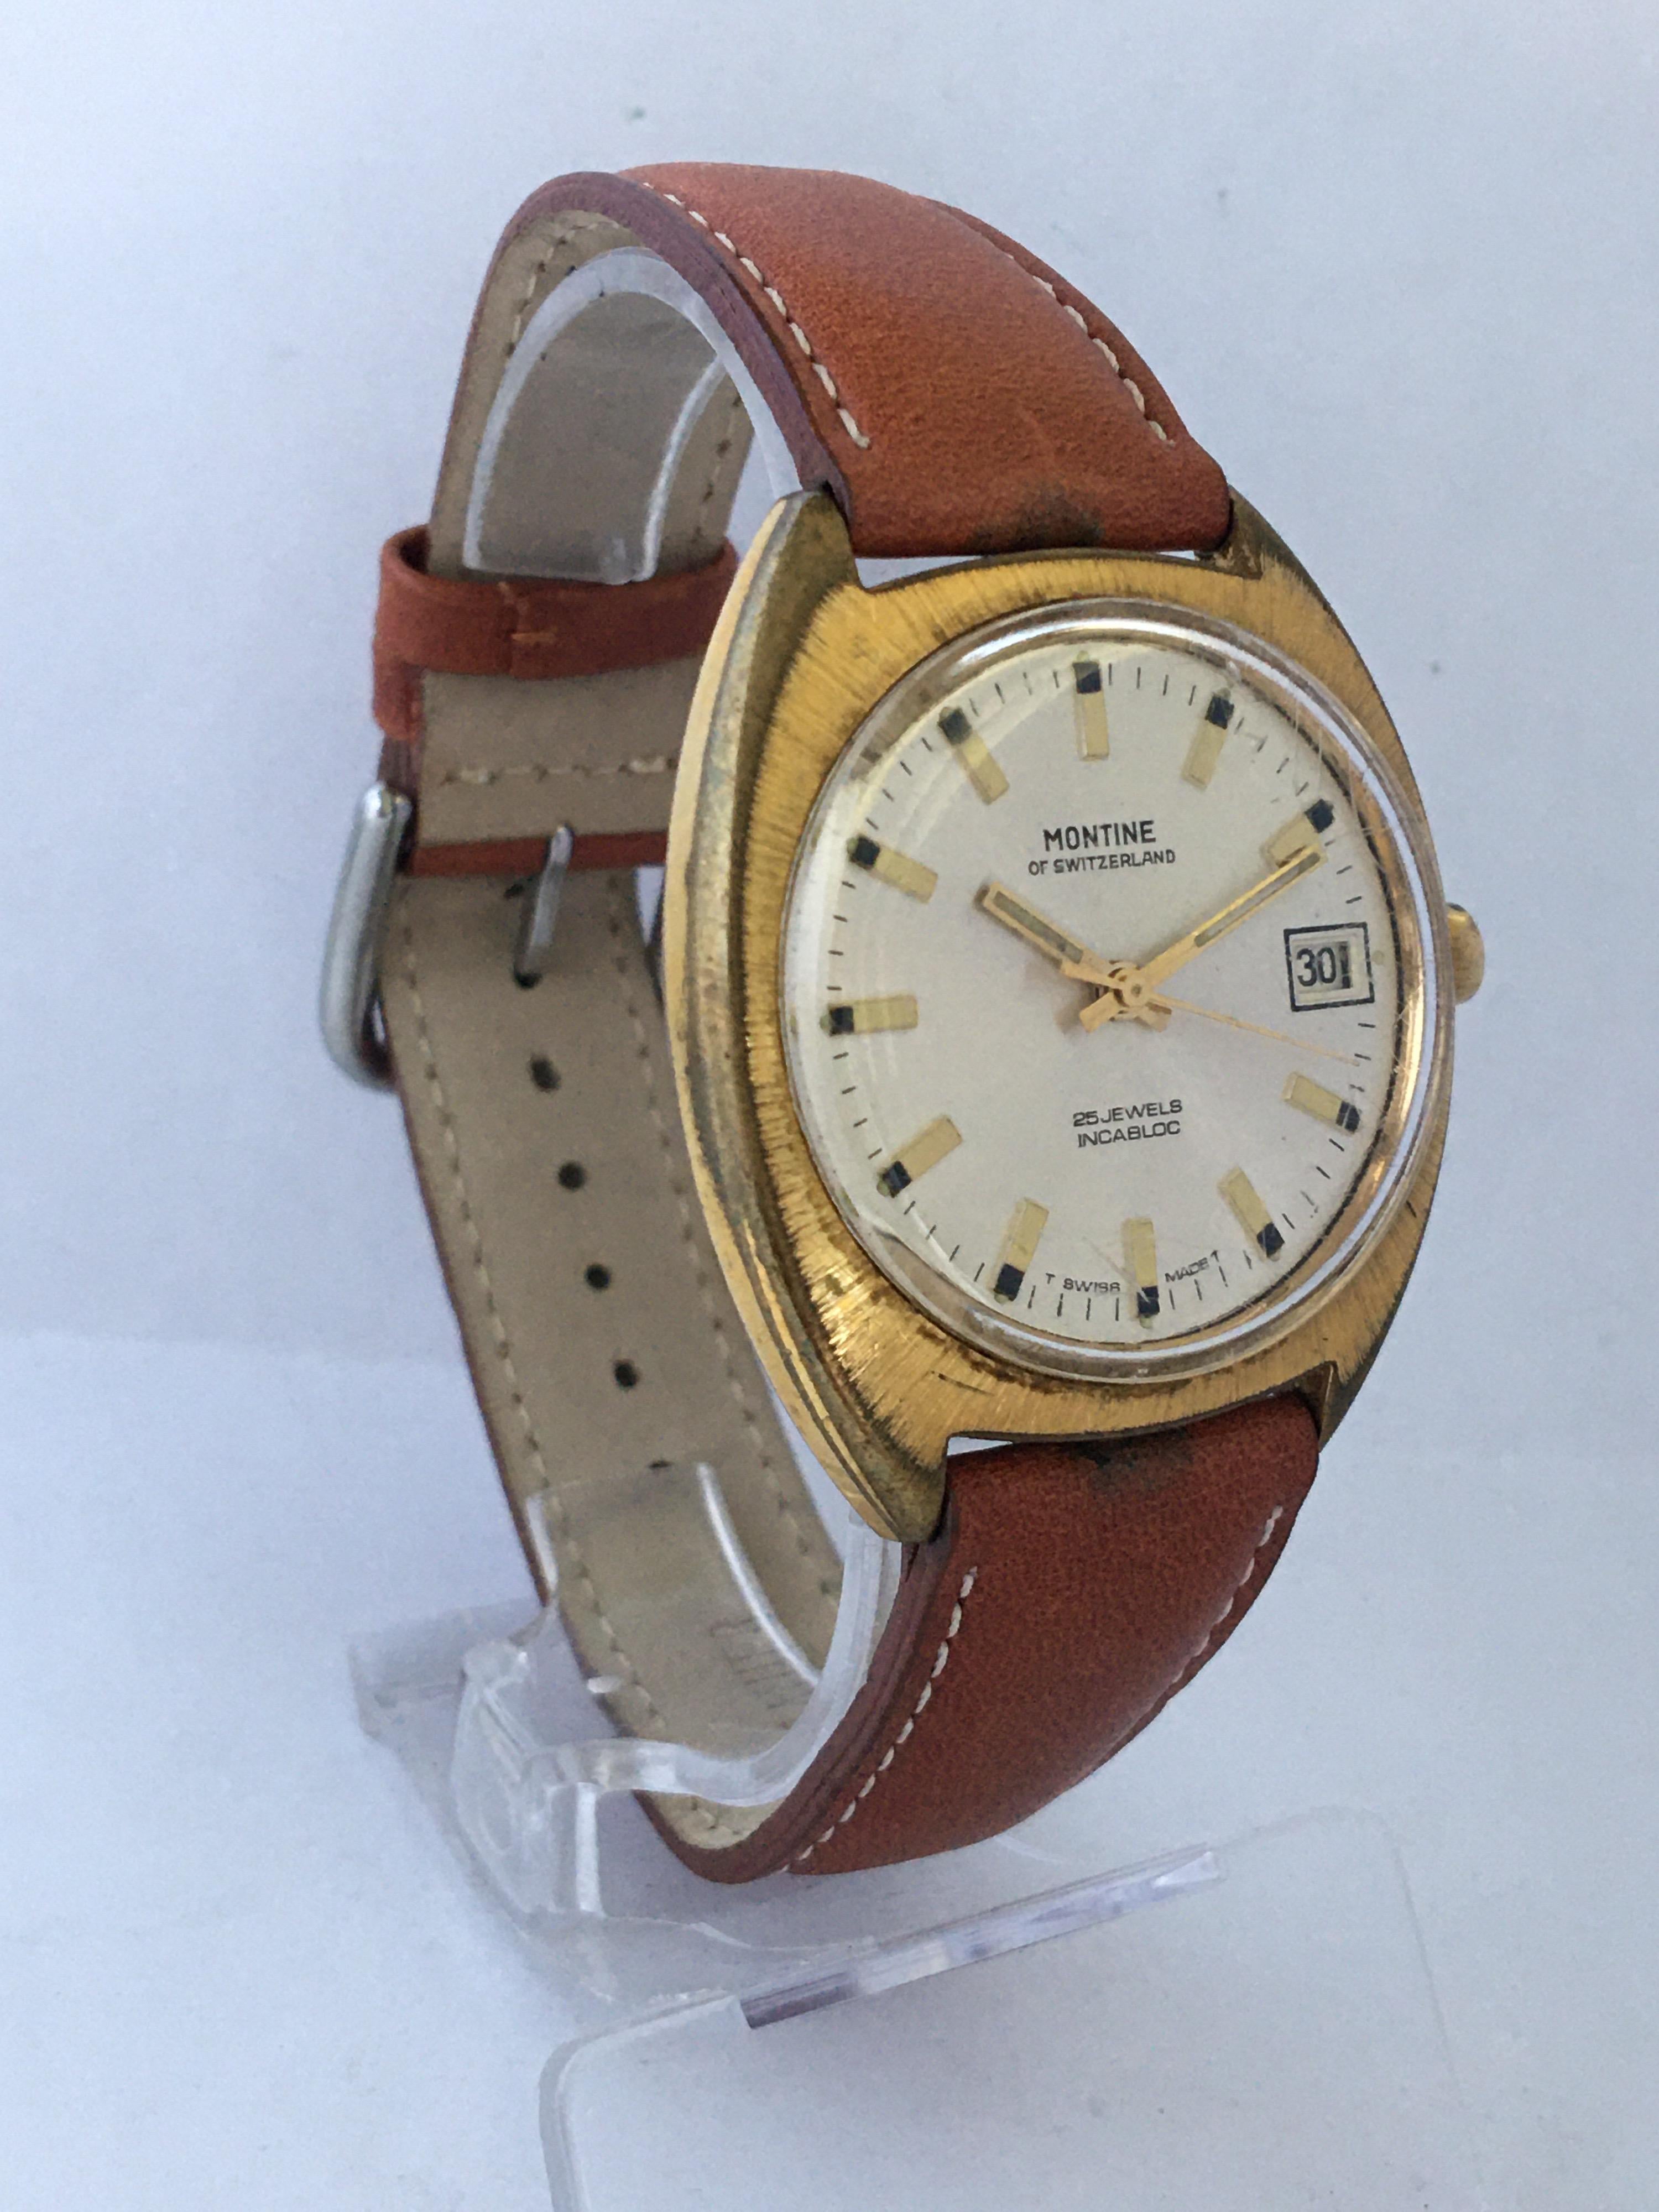 This charming mechanical swiss watch is in good working condition and it is running well. Visible signs of ageing and gentle used with Scratches on the glass and some scratches and tarnish on the gold plated case as shown. It’s light brown leather